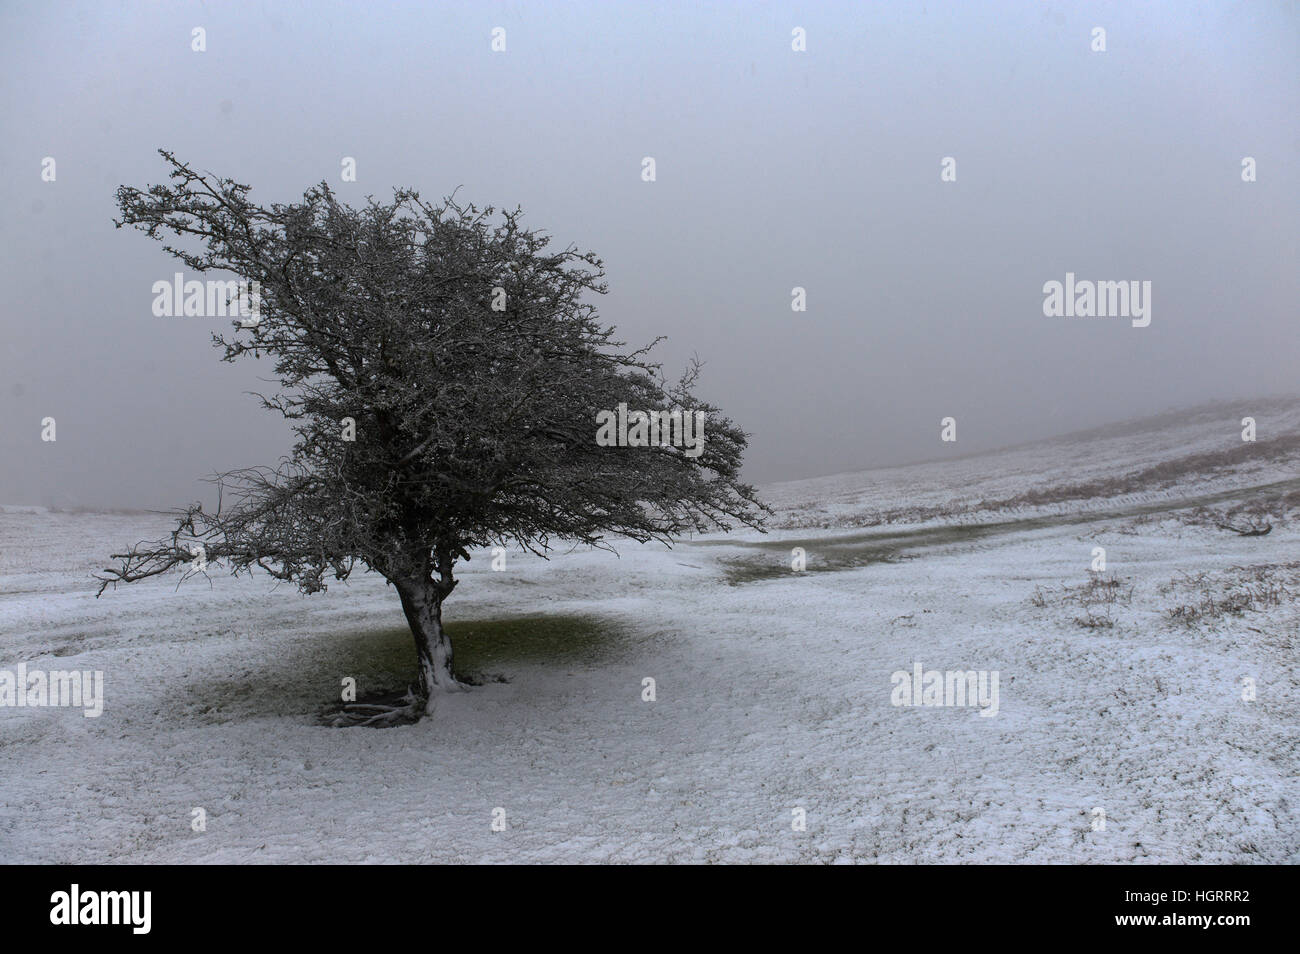 Builth Wells, Powys, Wales, UK. 12th January 2017.  The landscape is bleak and wintry on the high moorland of the Mynydd Epynt range near Builth Wells in Powys, Mid Wales, UK. © Graham M. Lawrence/Alamy Live News. Stock Photo